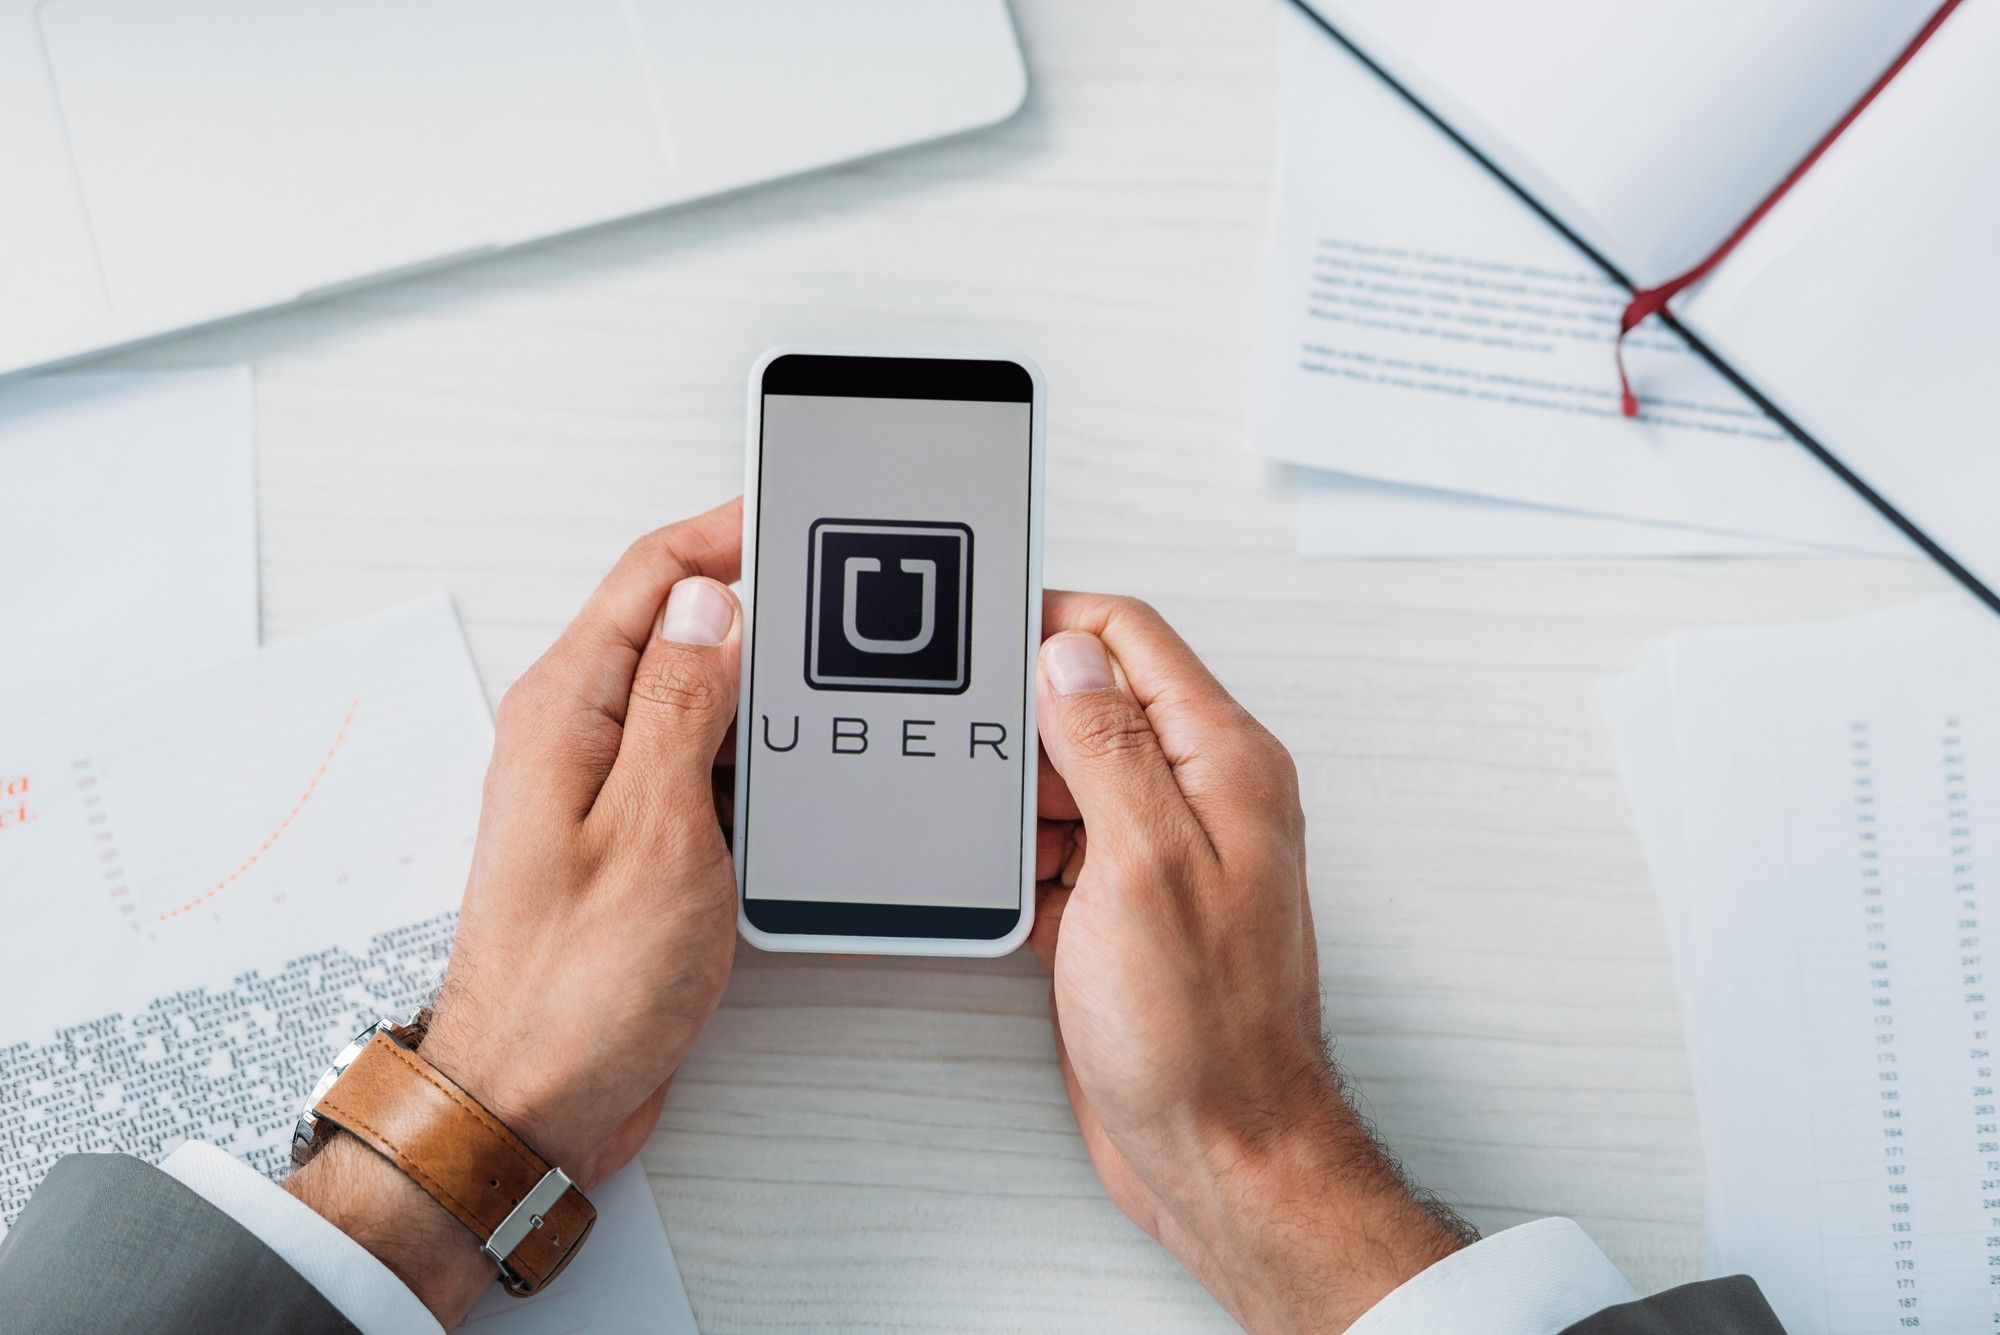 A plaintiff claims that Uber's rating system allows for racial discrimination.